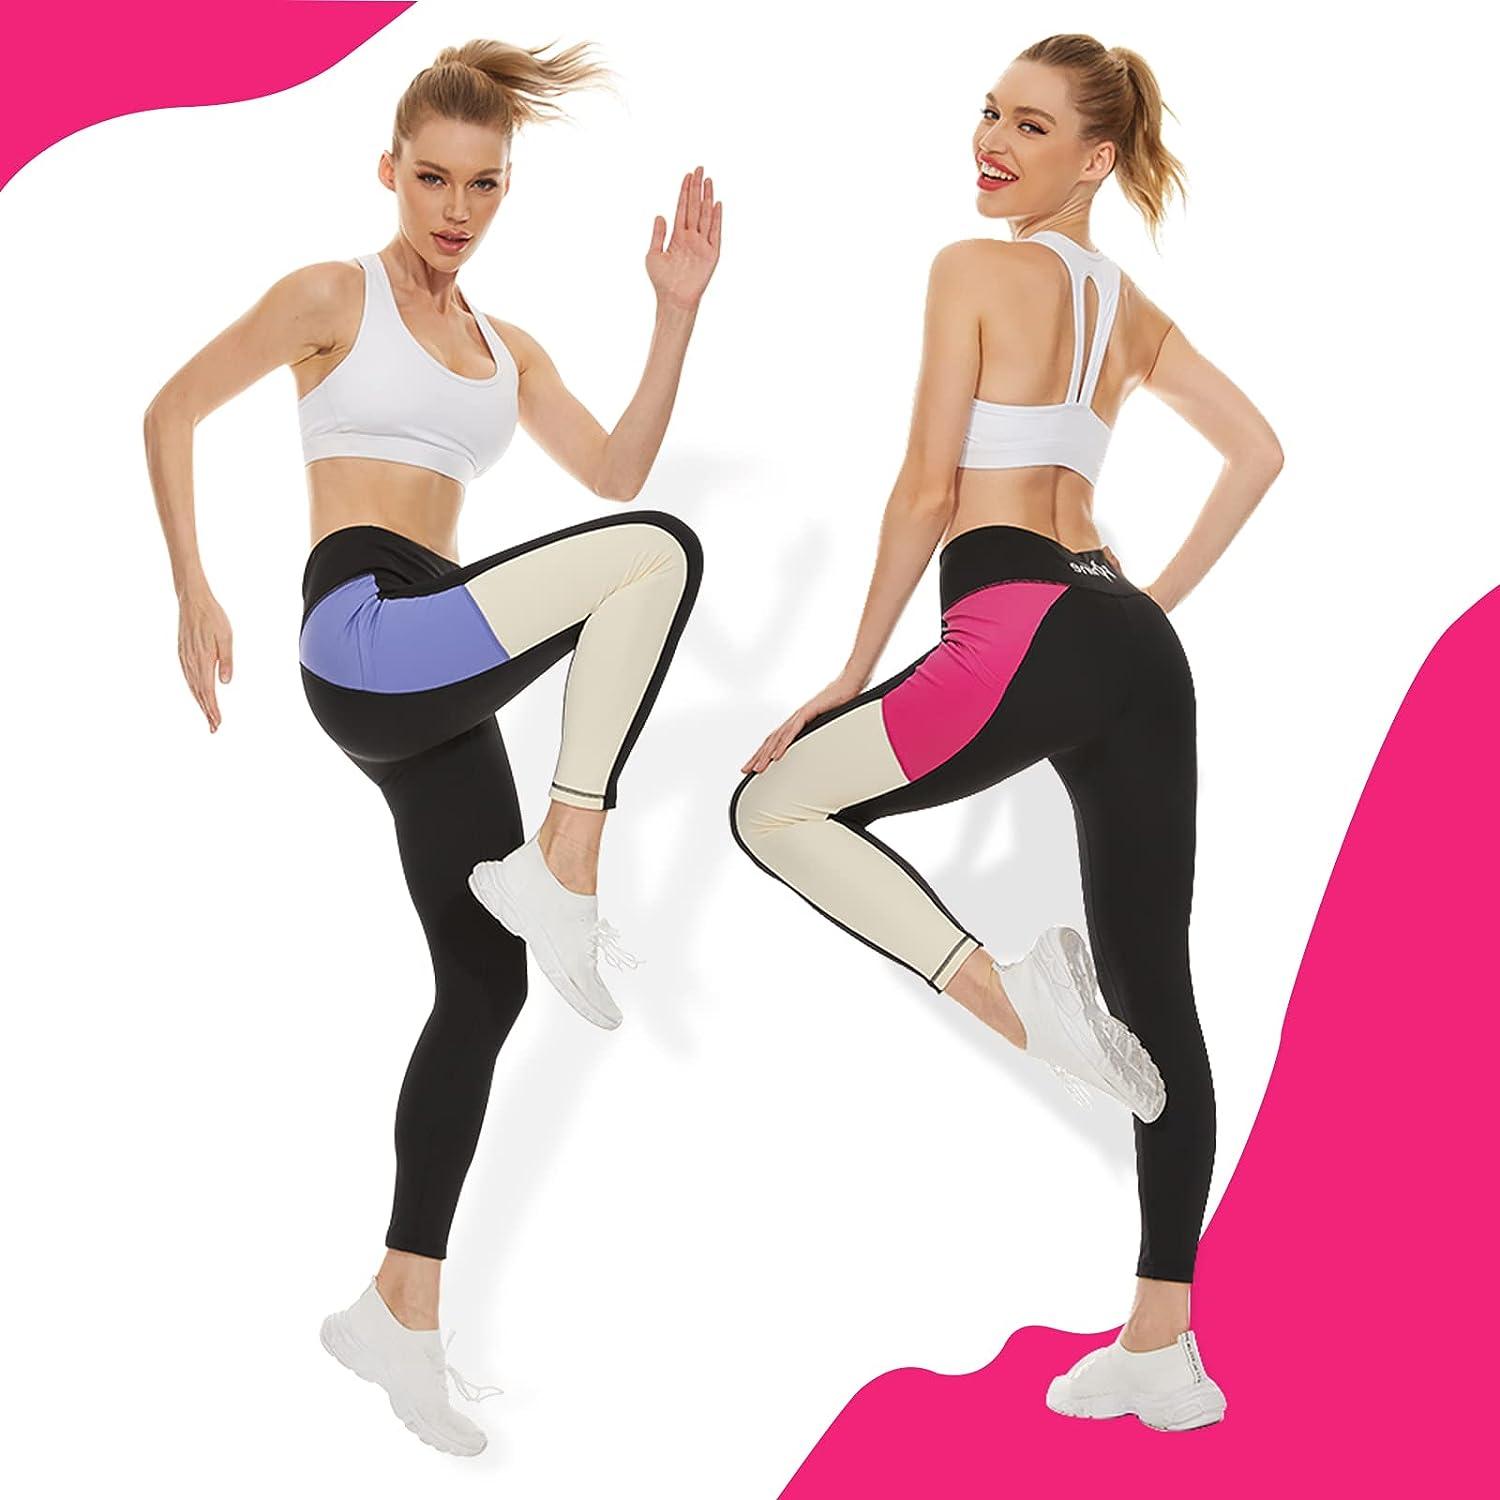 Yoga Leggings: Get Ready to Get Your Workout On Women's Sportswear Yoga  Leggings With Inside Pocket, Yoga Pants, Spandex -  Canada